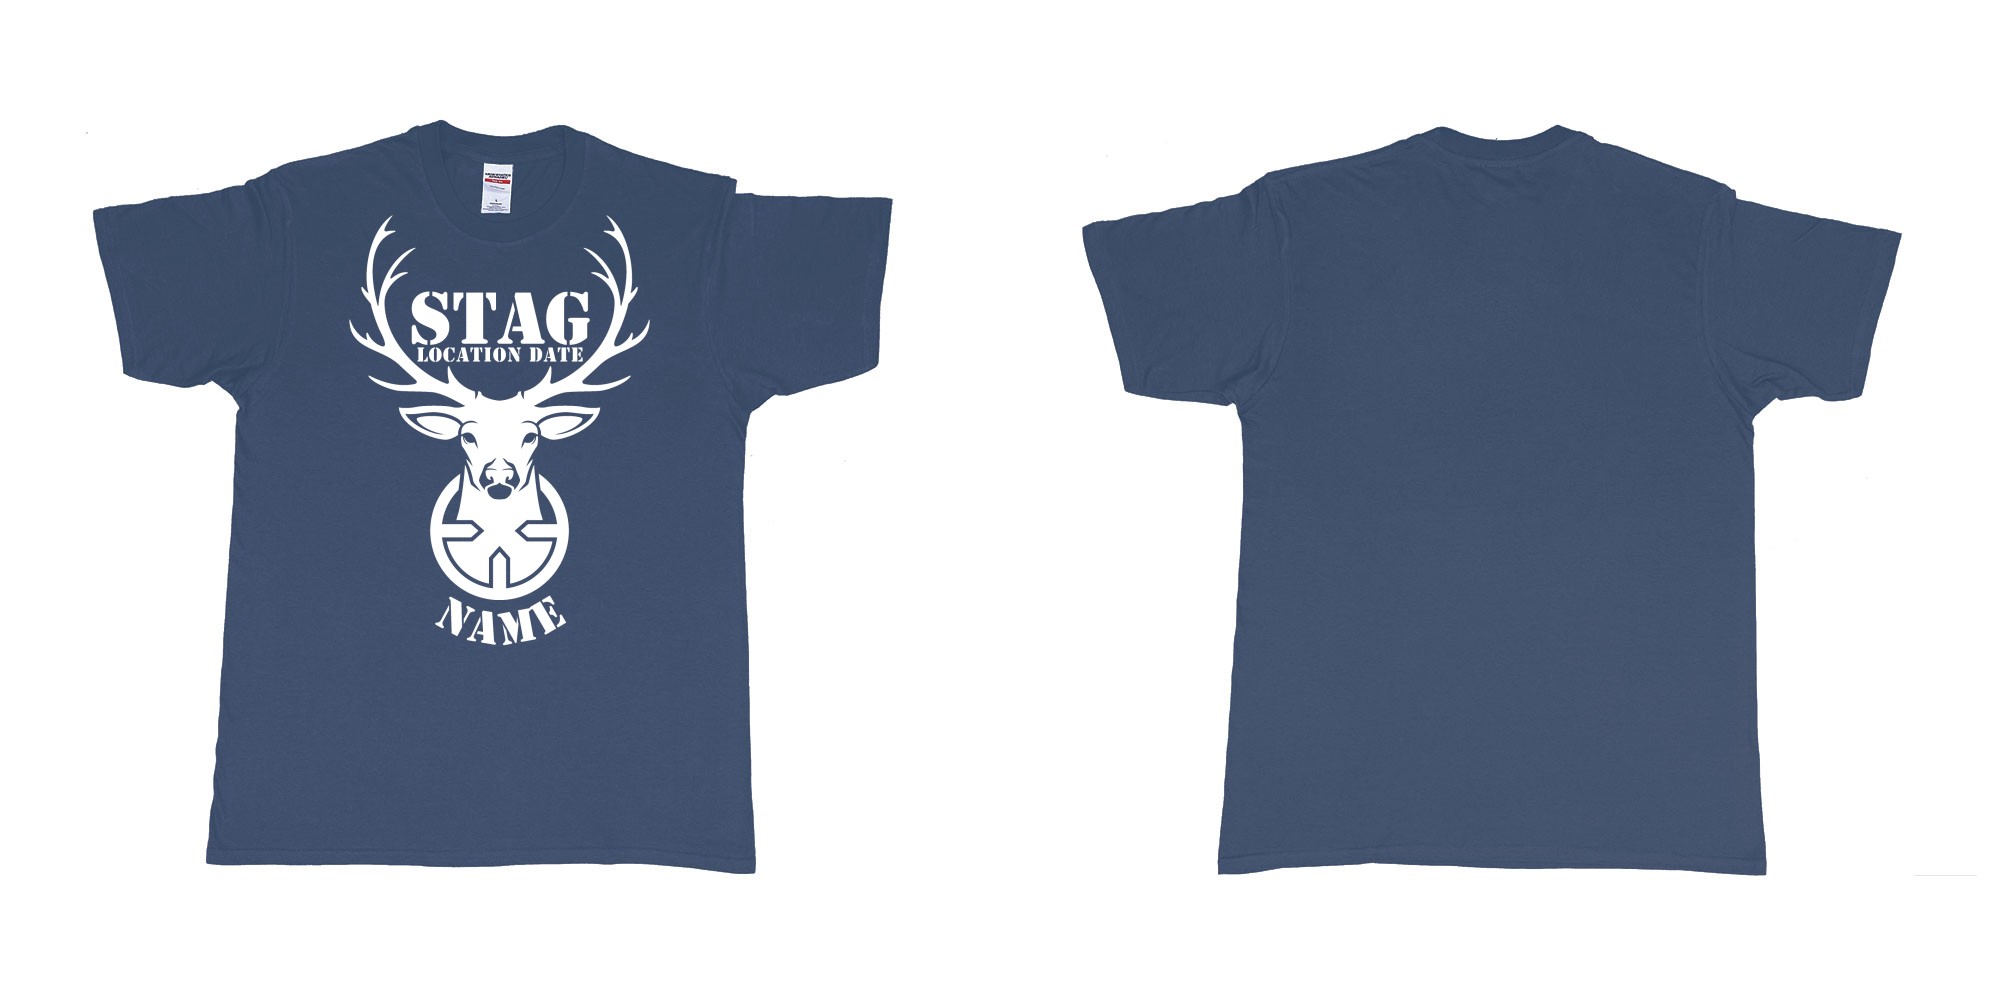 Custom tshirt design aiming for a stag custom tshirt print in fabric color navy choice your own text made in Bali by The Pirate Way